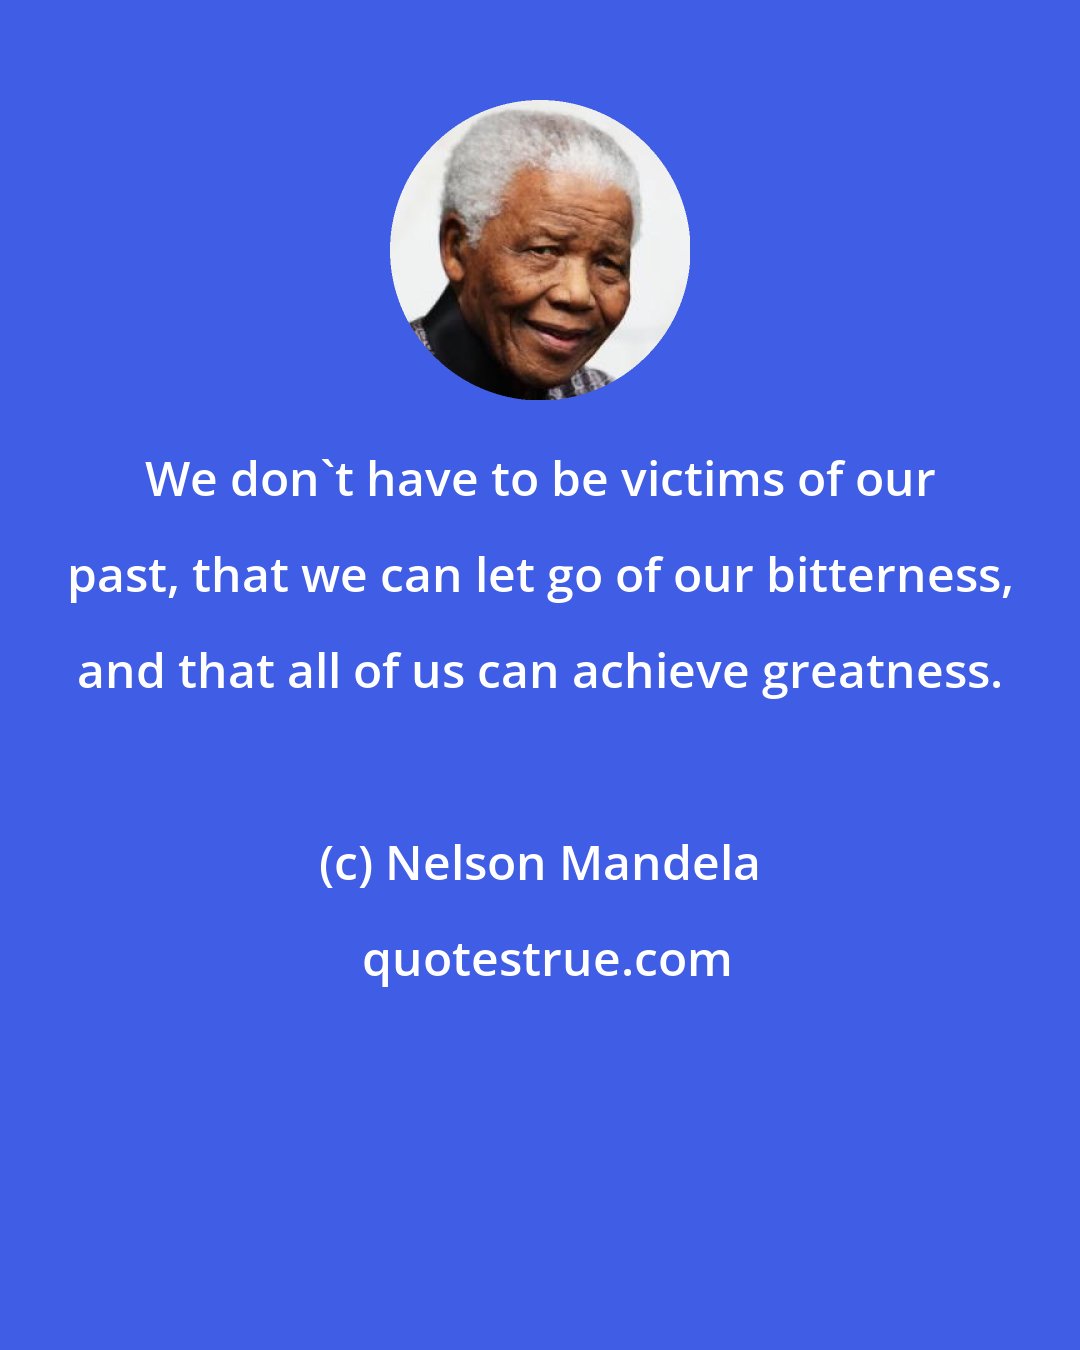 Nelson Mandela: We don't have to be victims of our past, that we can let go of our bitterness, and that all of us can achieve greatness.